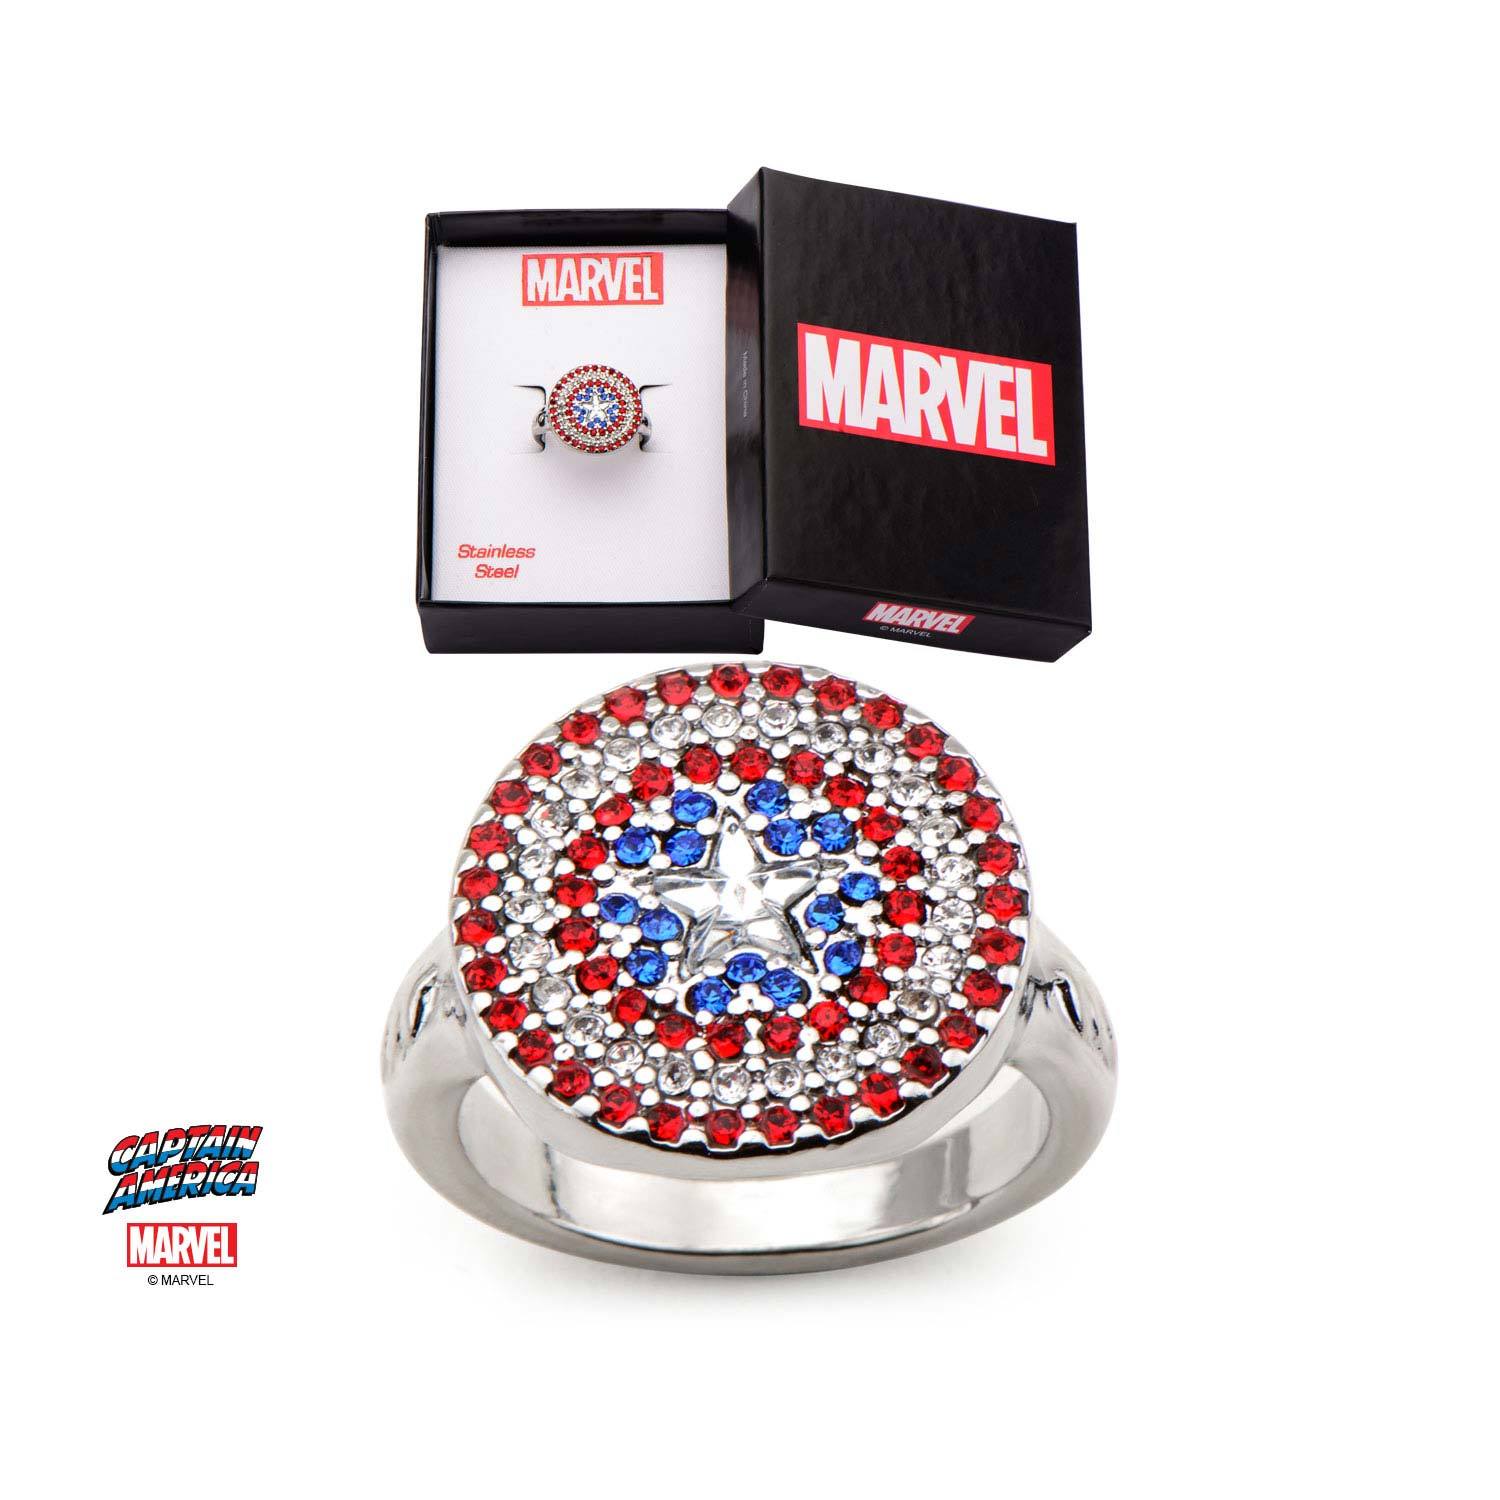 Marvel's Captain America Shield Logo Ring with Red, White, and Blue Bling